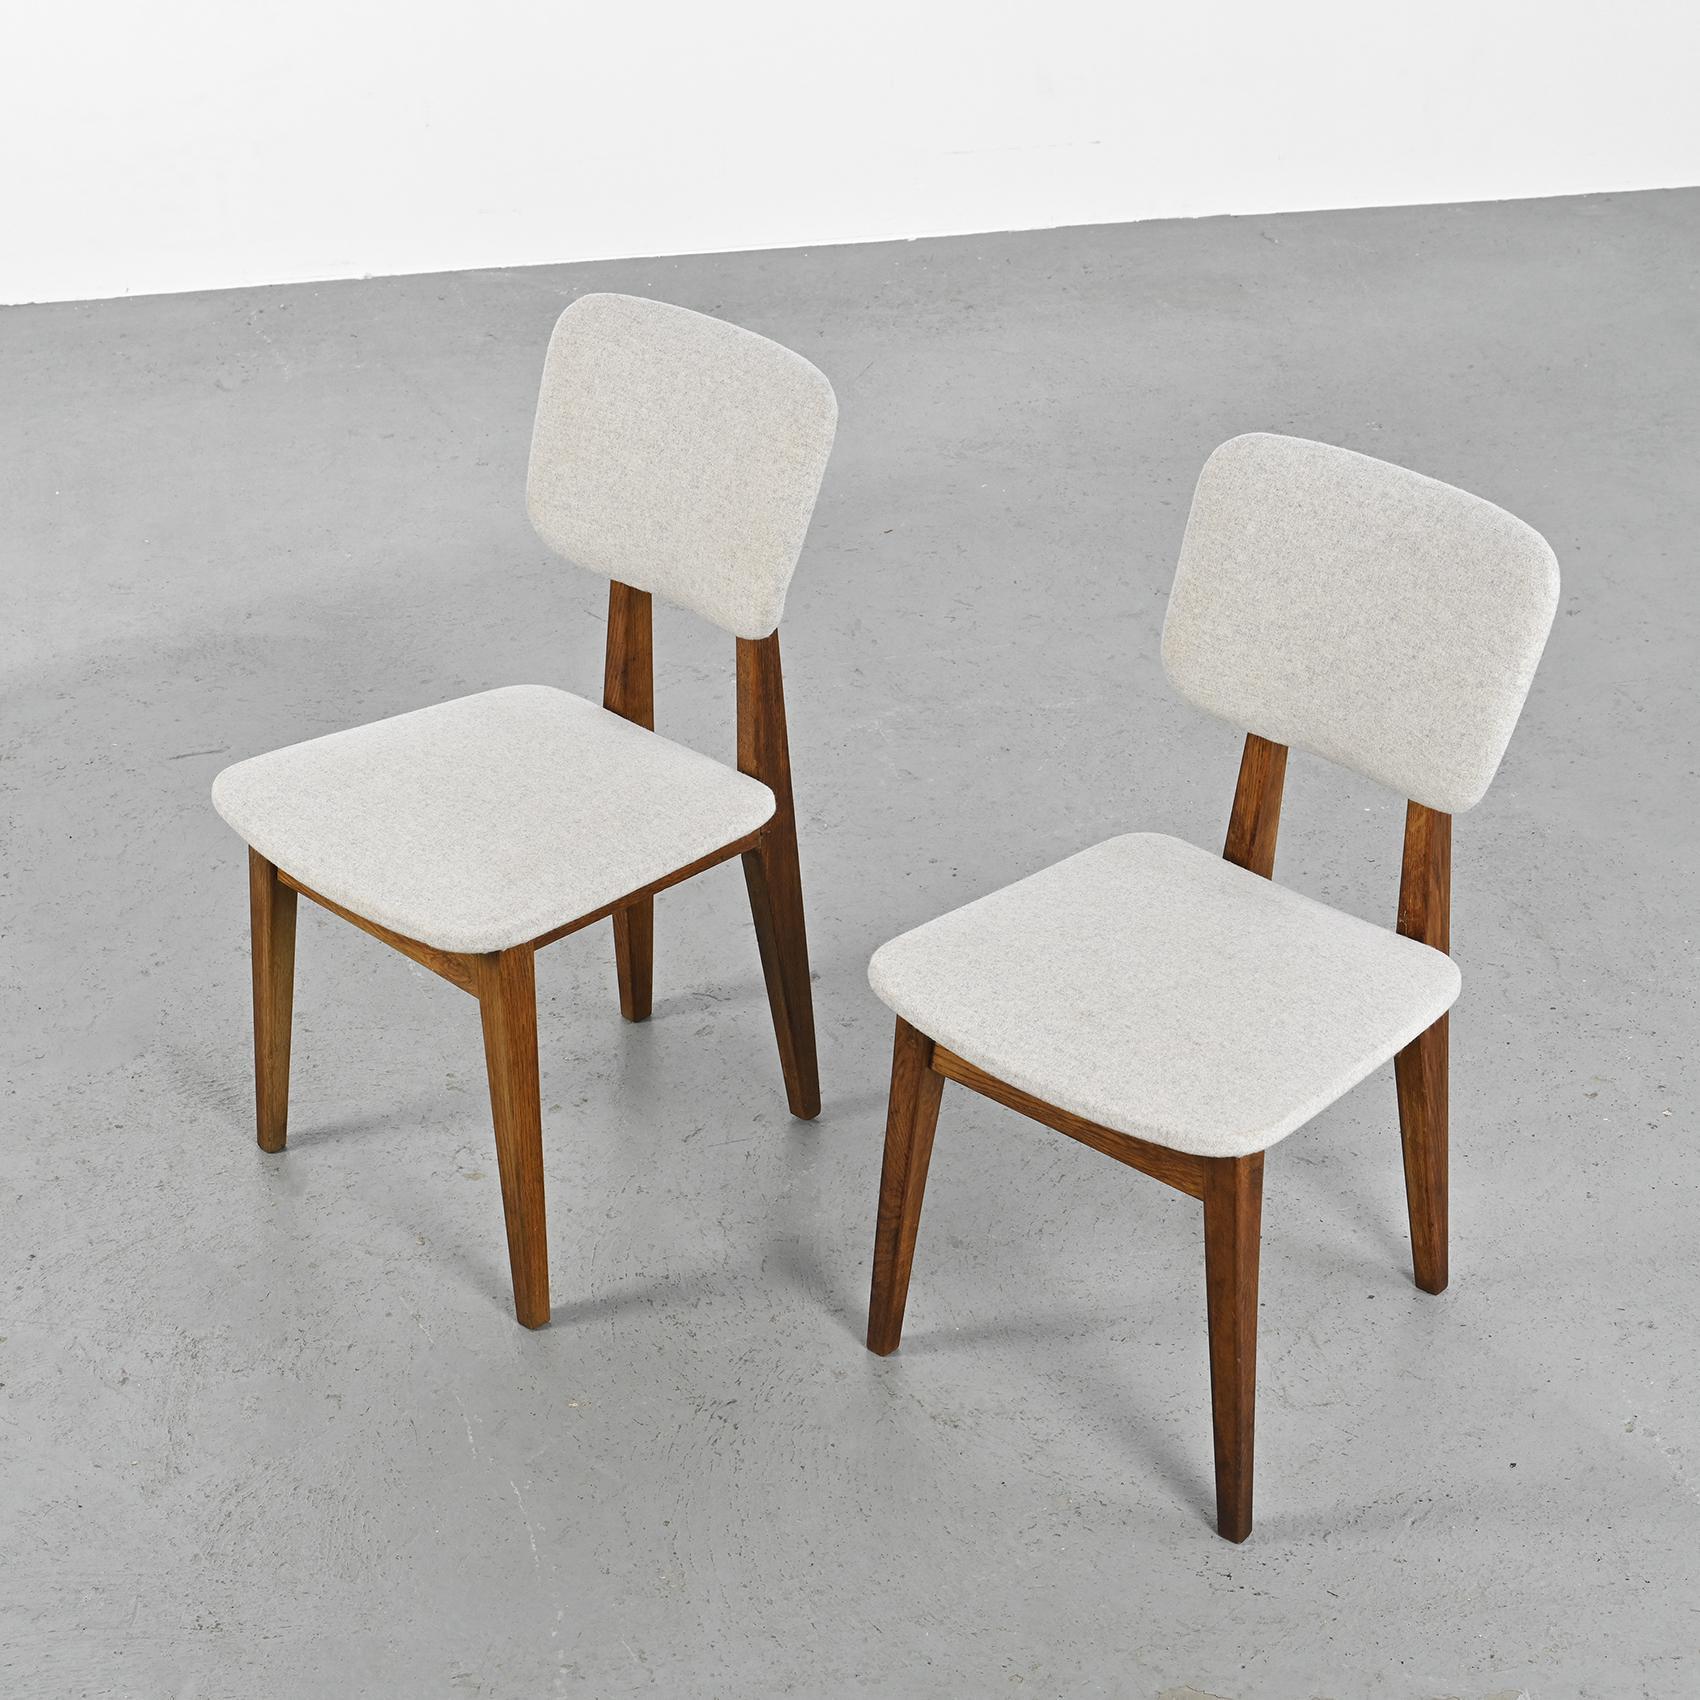 20th Century  Pair of Chairs by Pierre Guariche, circa 1953